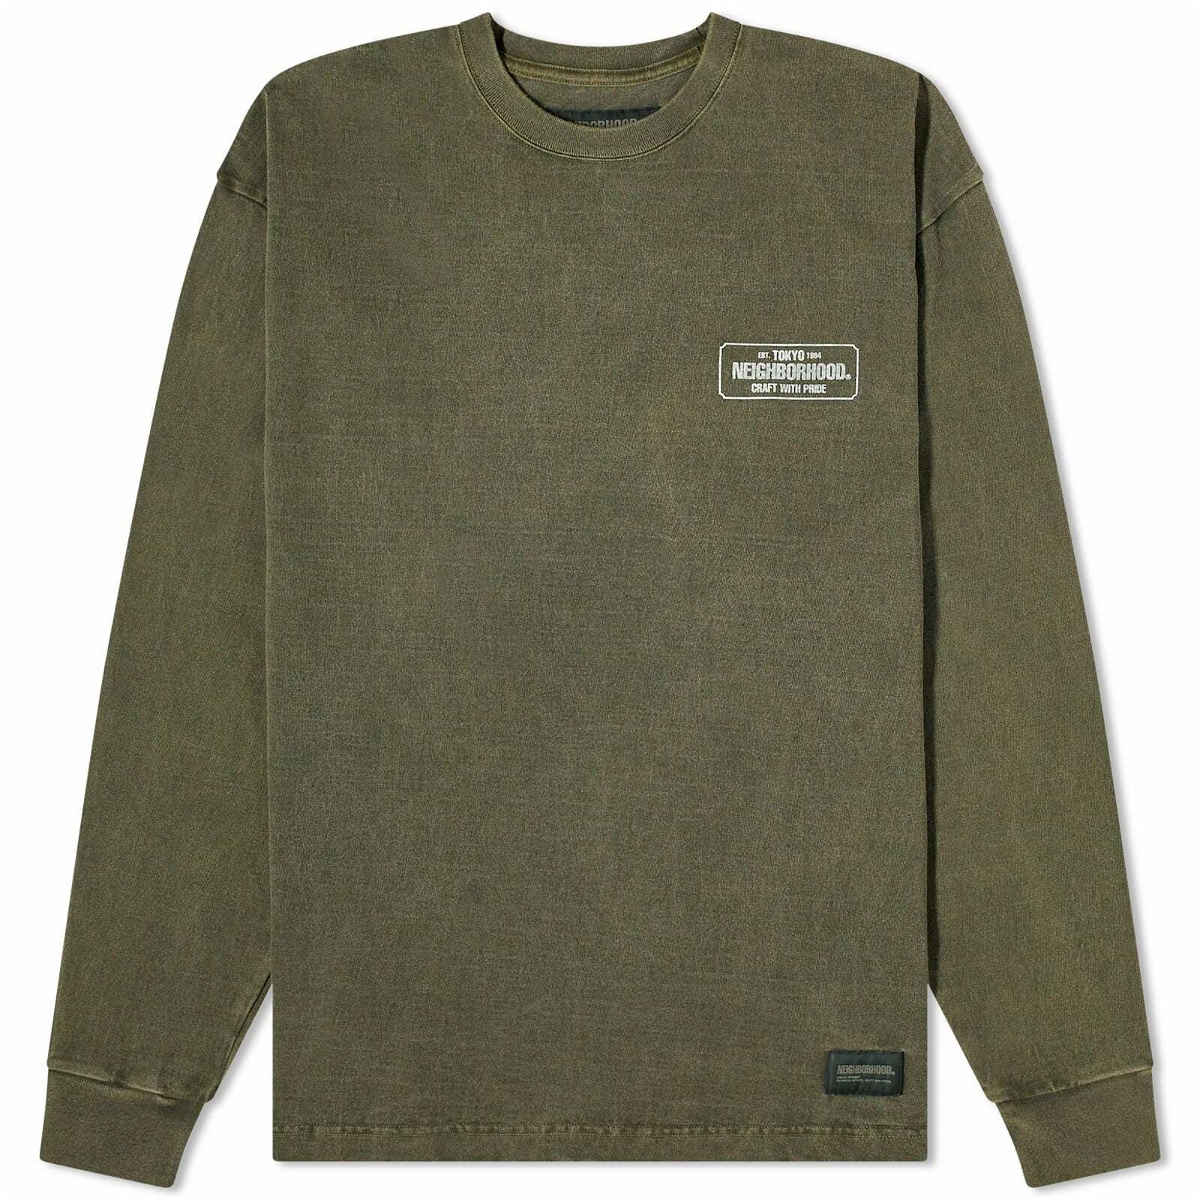 Photo: Neighborhood Men's Long Sleeve Pigment Dyed T-Shirt in Olive Drab